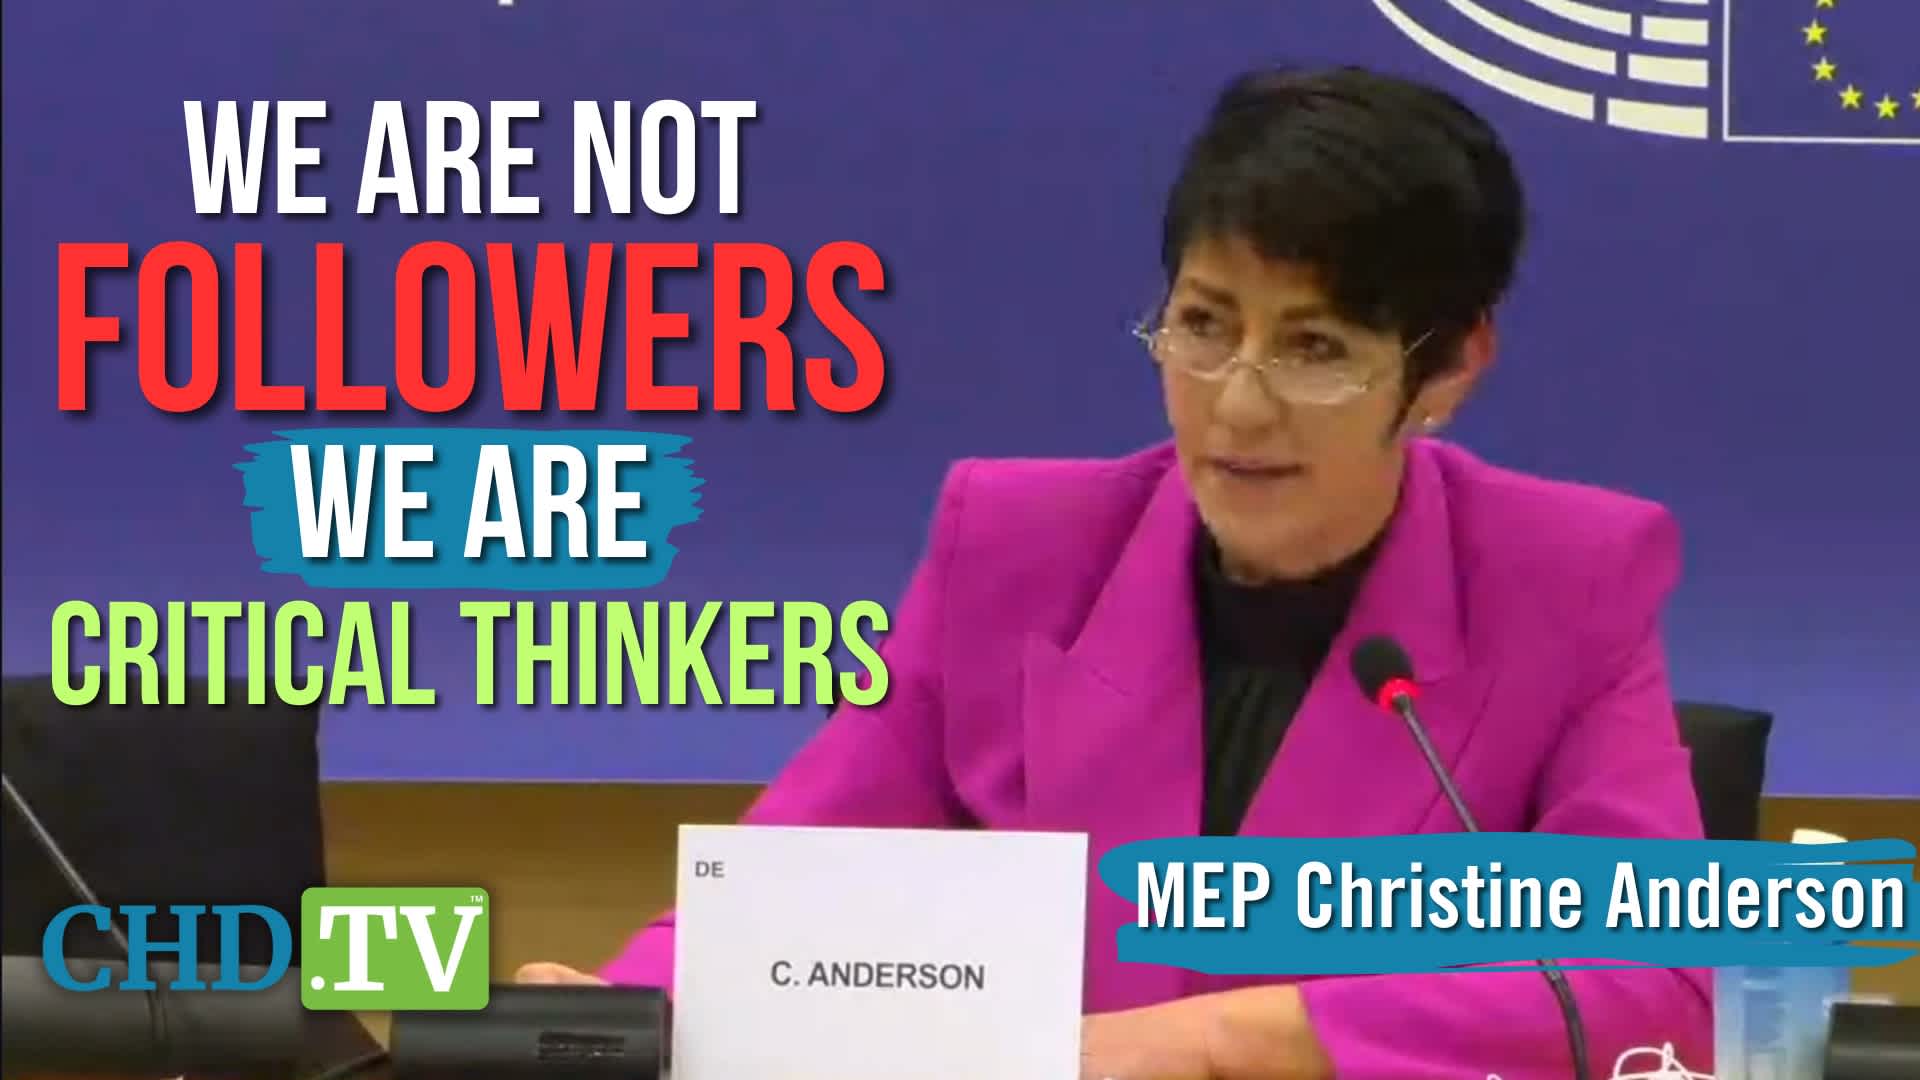 MEP Anderson Commends the ‘Small Fringe Minority’: We Will Not Have to Justify Our Silence to Our Grandchildren